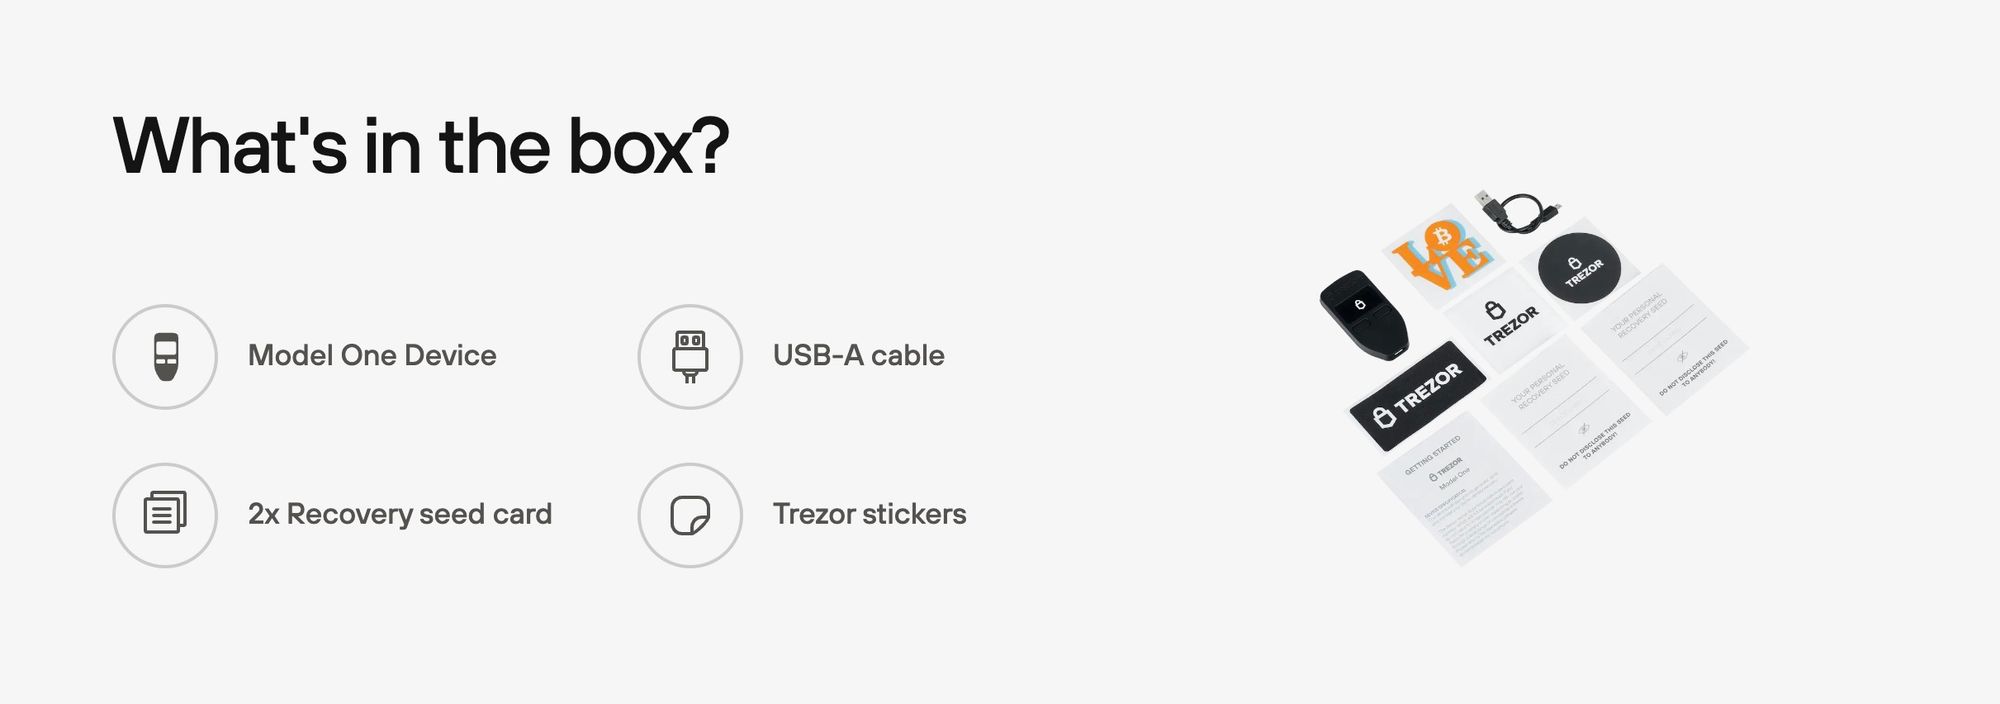 Trezor One: Items Included In The Box